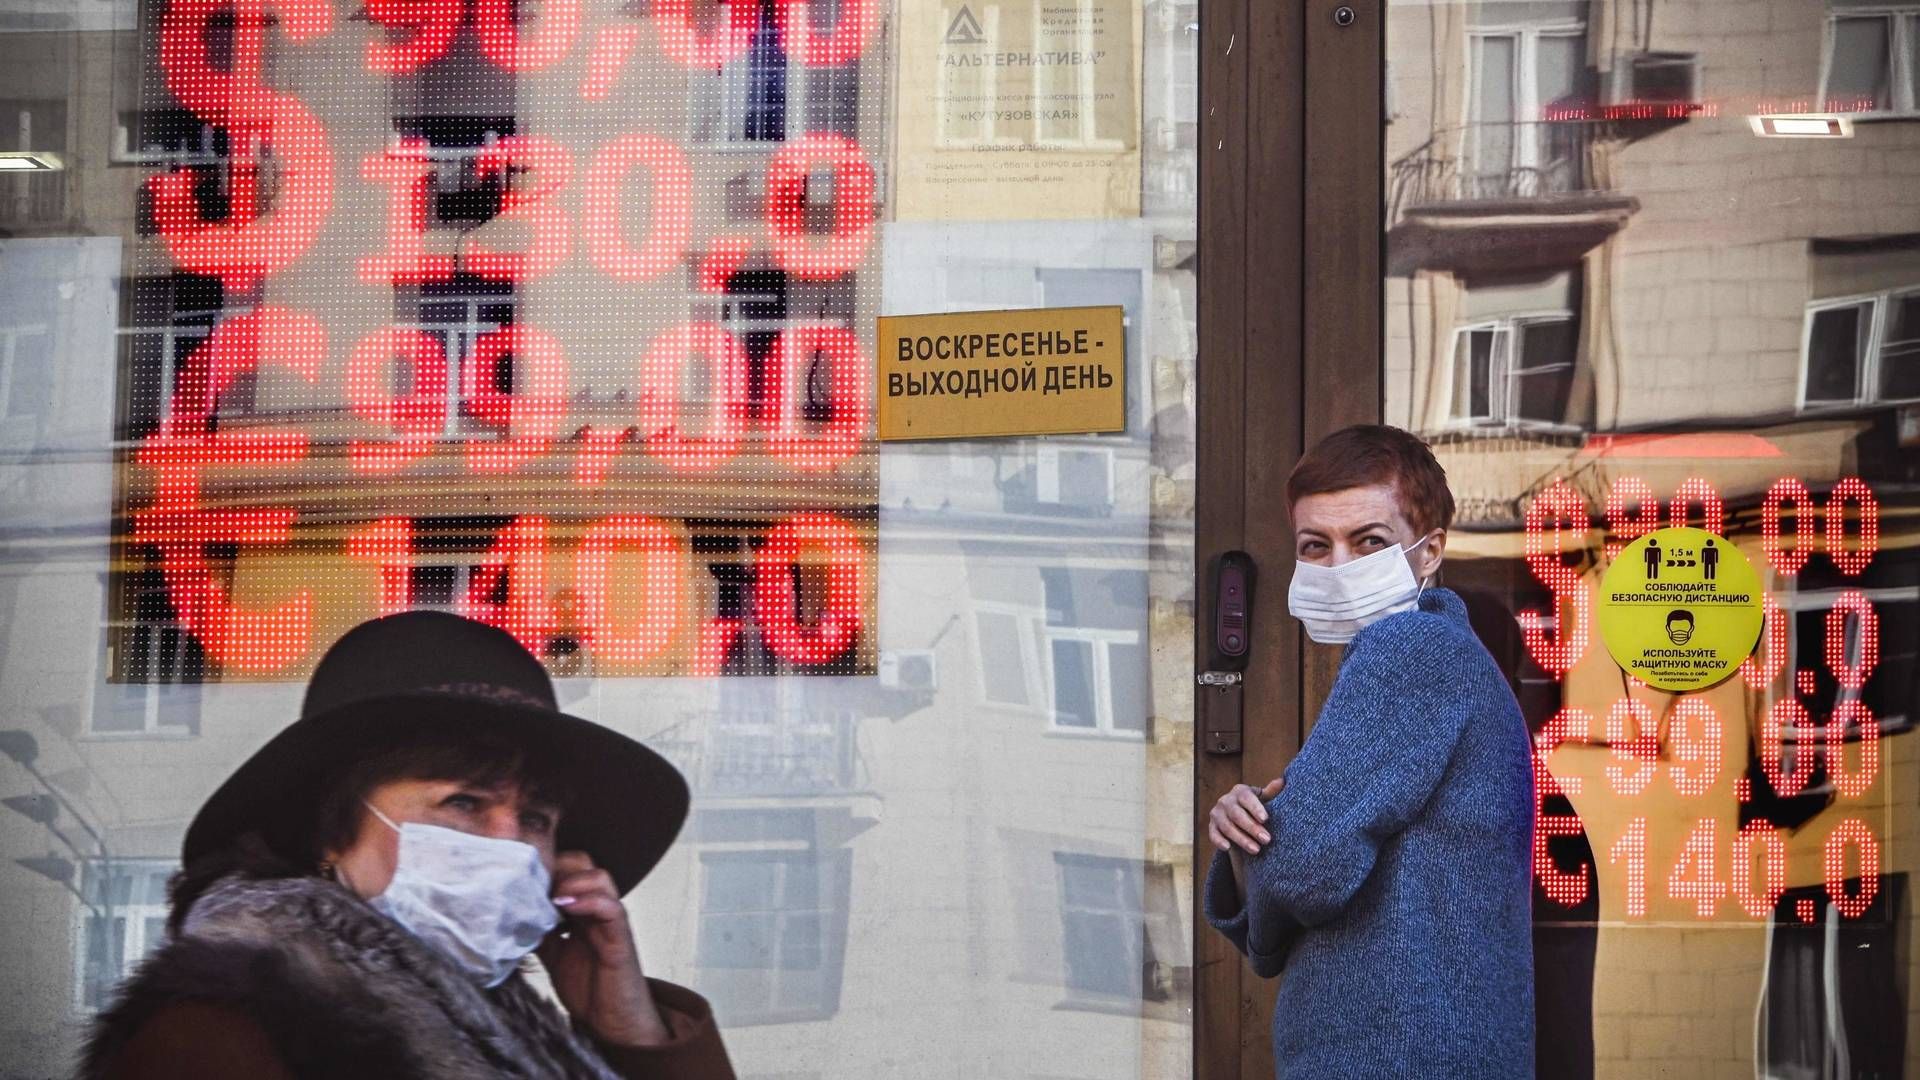 People walk past a currency exchange office in central Moscow on February 28, 2022. - The Russian ruble collapsed against the dollar and the euro on the Moscow Stock Exchange on February 28 as the West punished Moscow with harsh new sanctions over the Kremlin's invasion of Ukraine. The ruble fell sharply at the start of currency trading, reaching 100.96 to the dollar, compared to 83.5 on Wednesday, the day before the invasion of Ukraine, and 113.52 to the euro, compared to 93.5 before the assault. (Photo by Alexander NEMENOV / AFP) | Photo: ALEXANDER NEMENOV/AFP / AFP